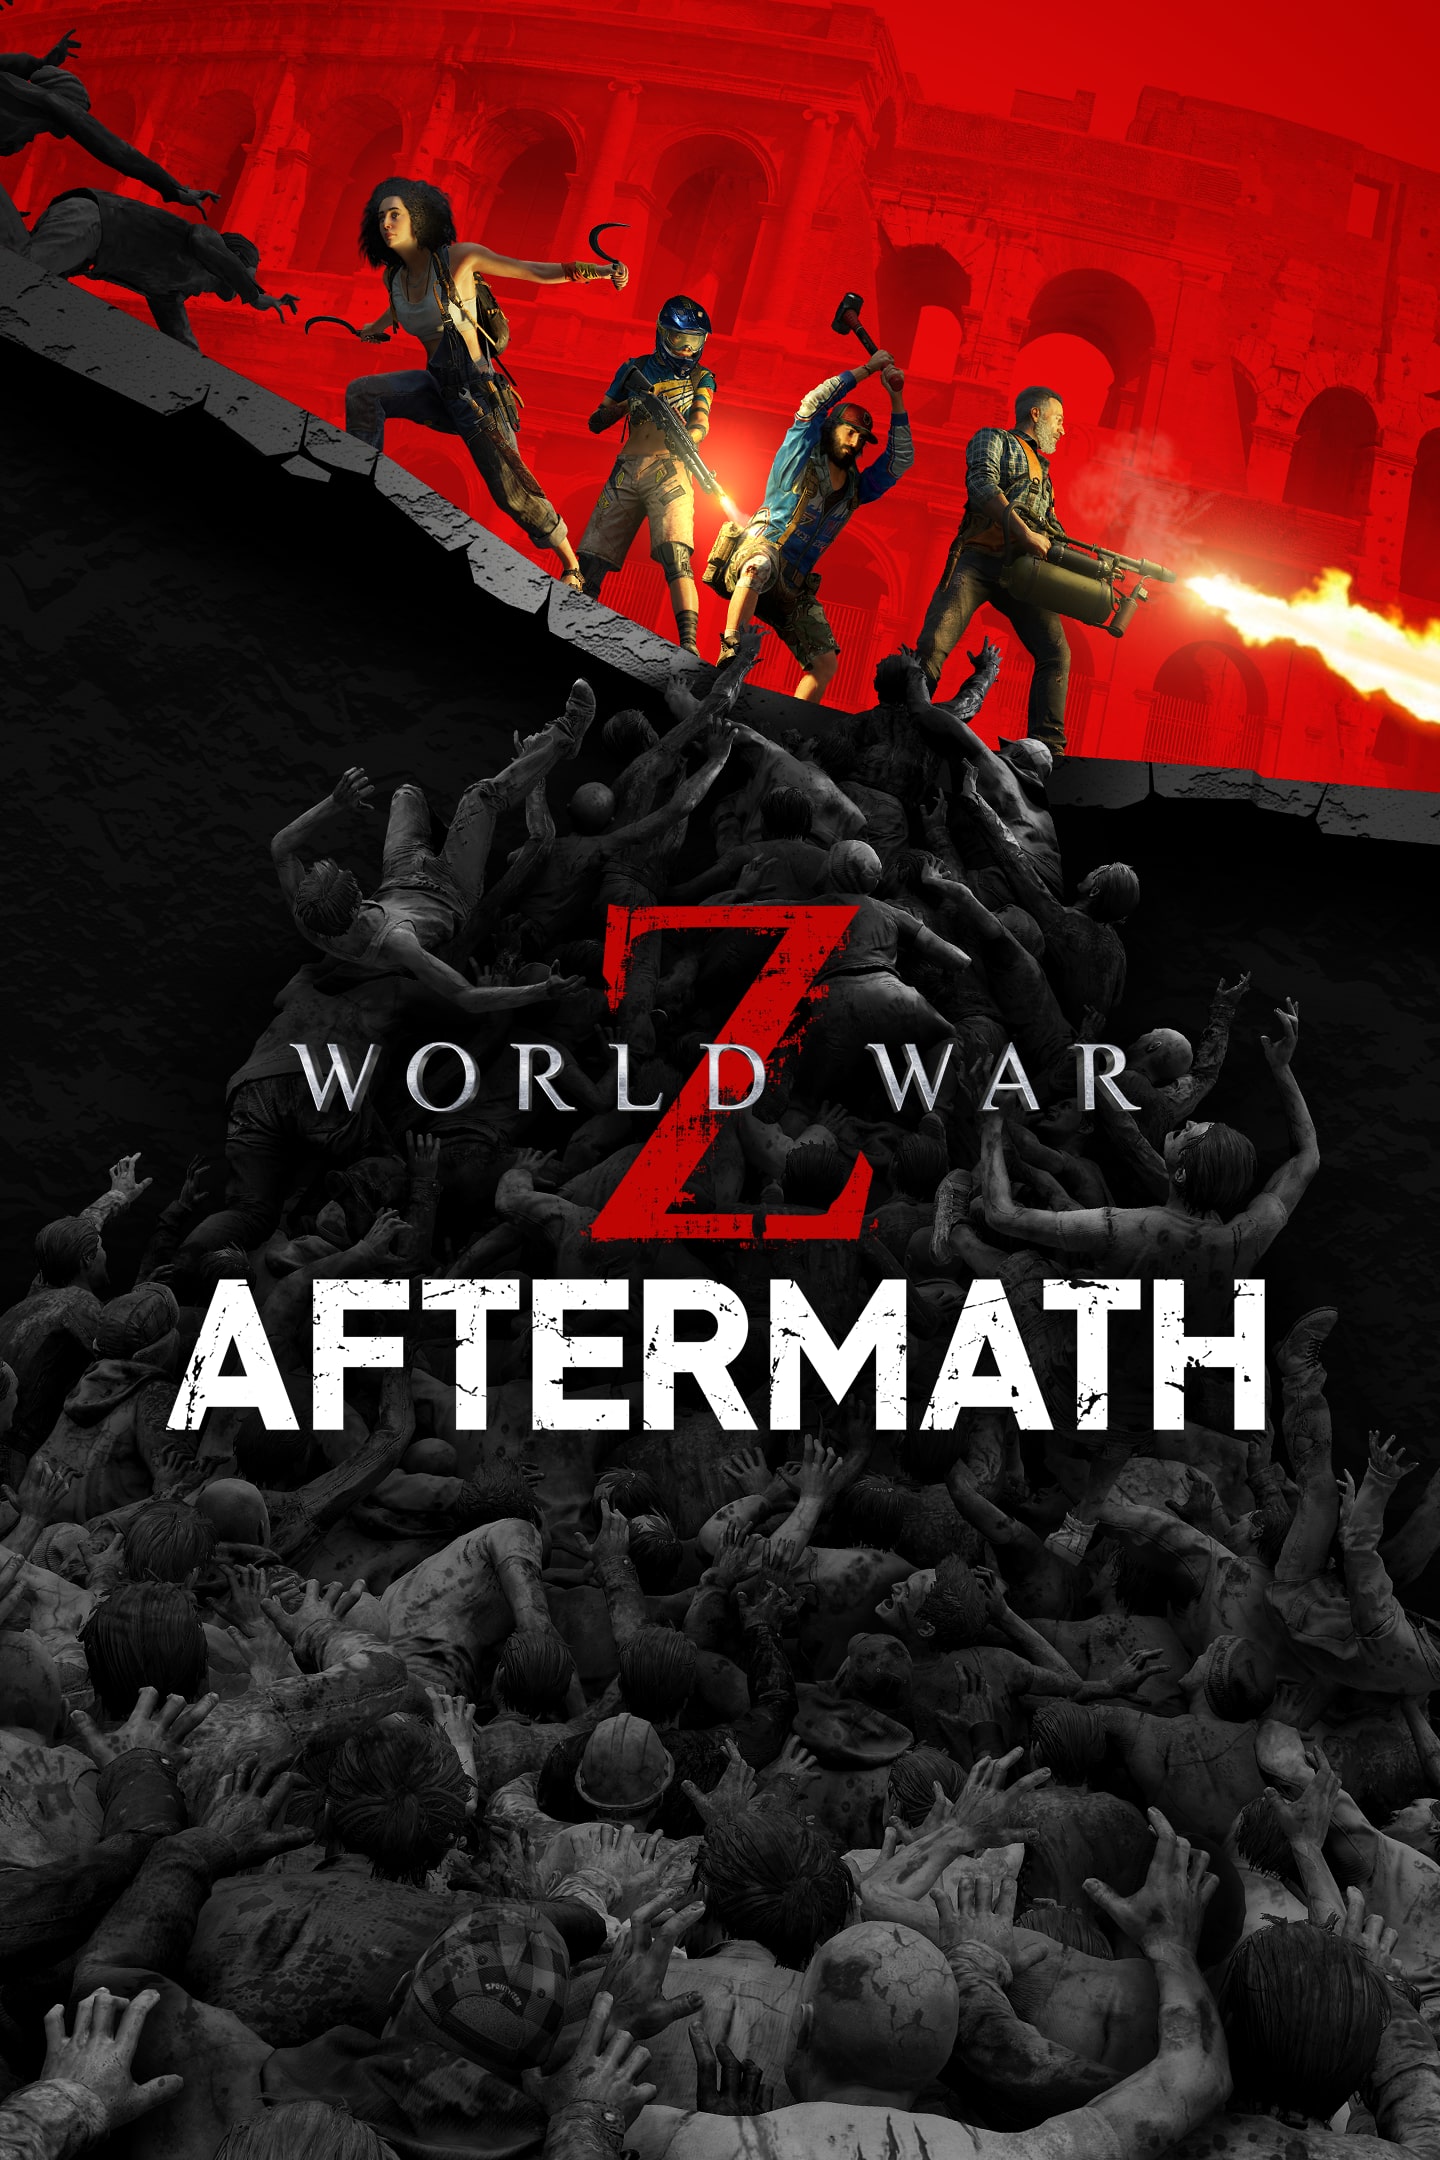 World War Z: Aftermath will release later this year